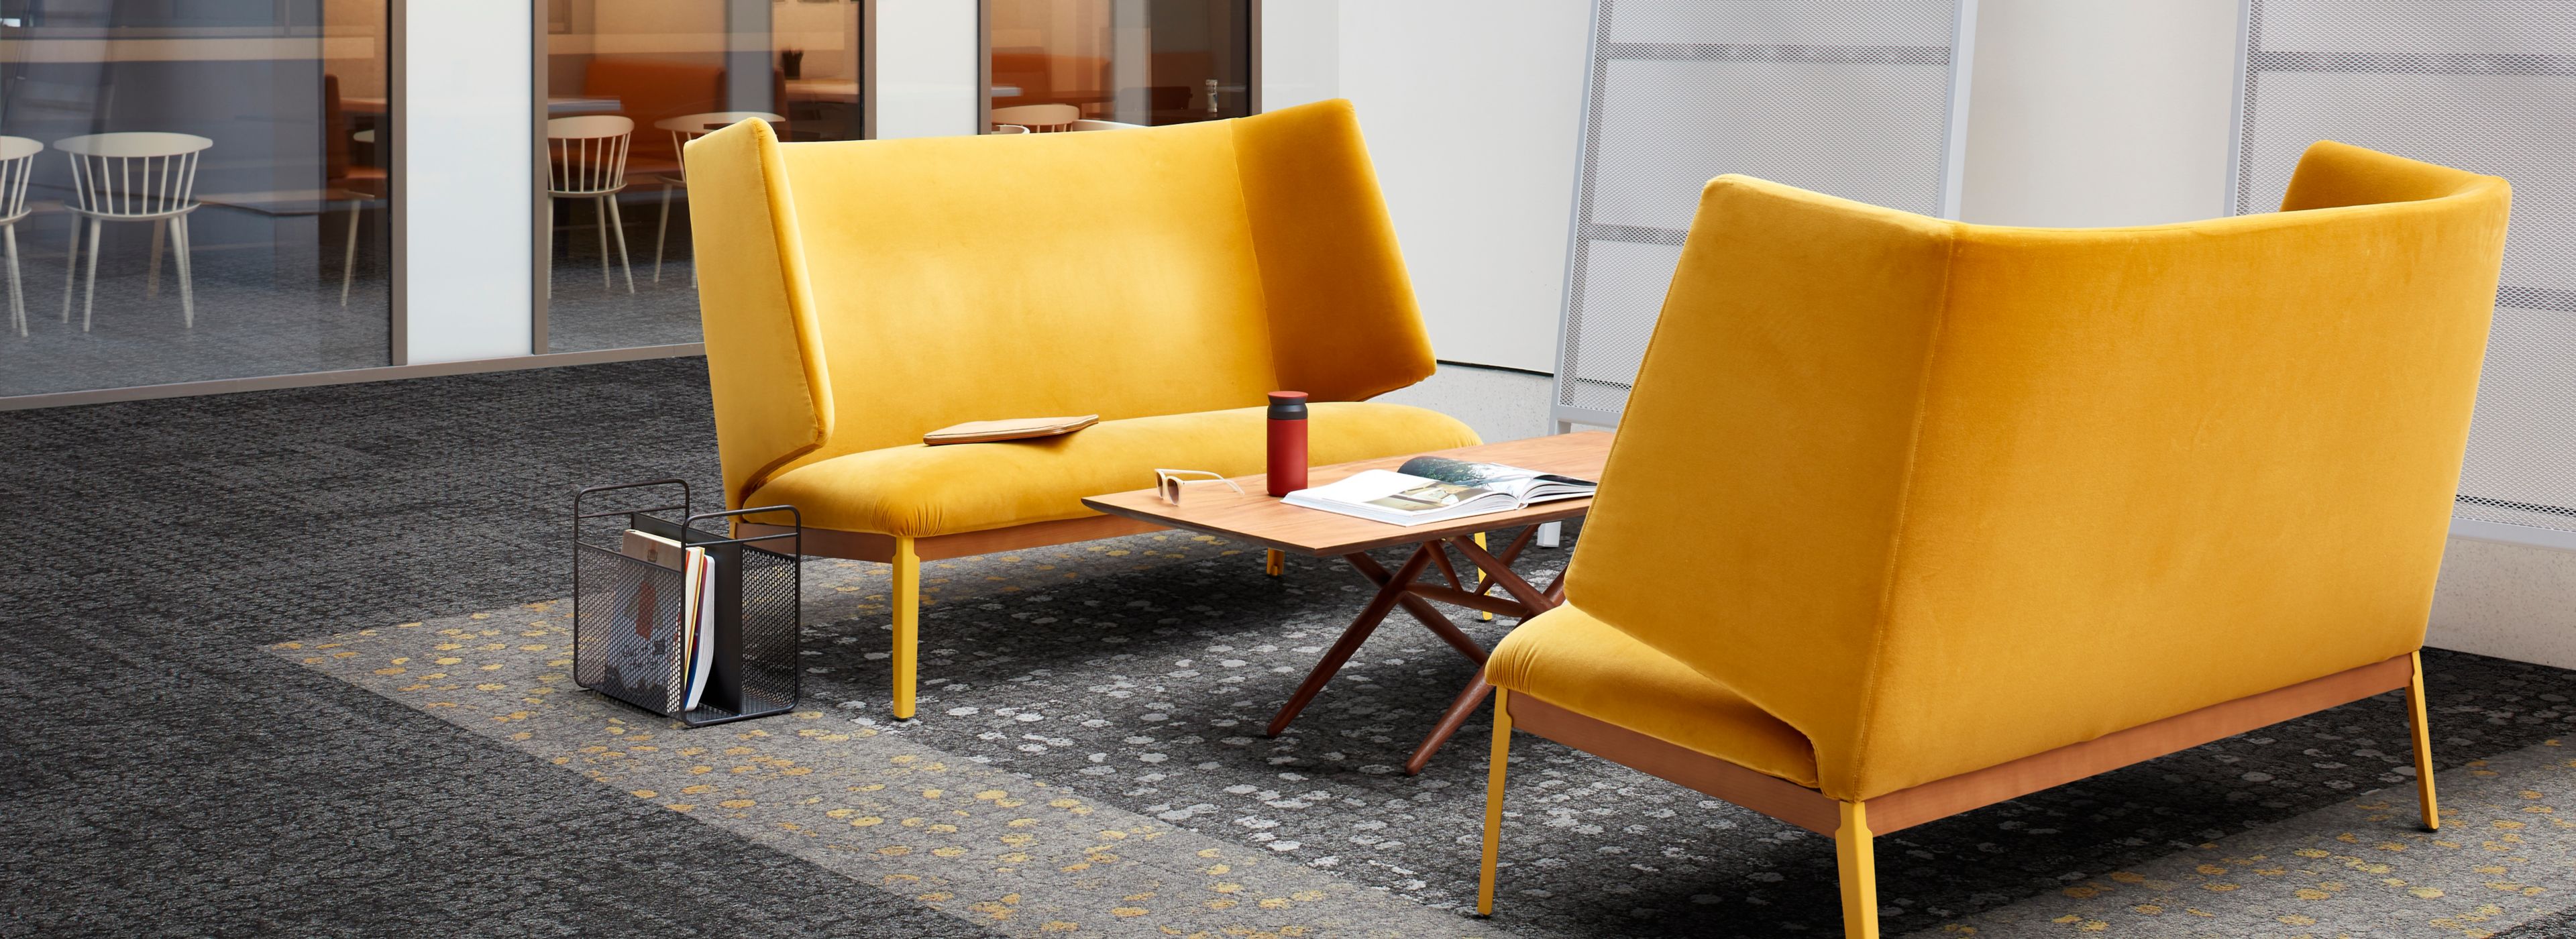 Interface Mercer Street and Broome Street carpet tile in seating area with two yellow couches número de imagen 1